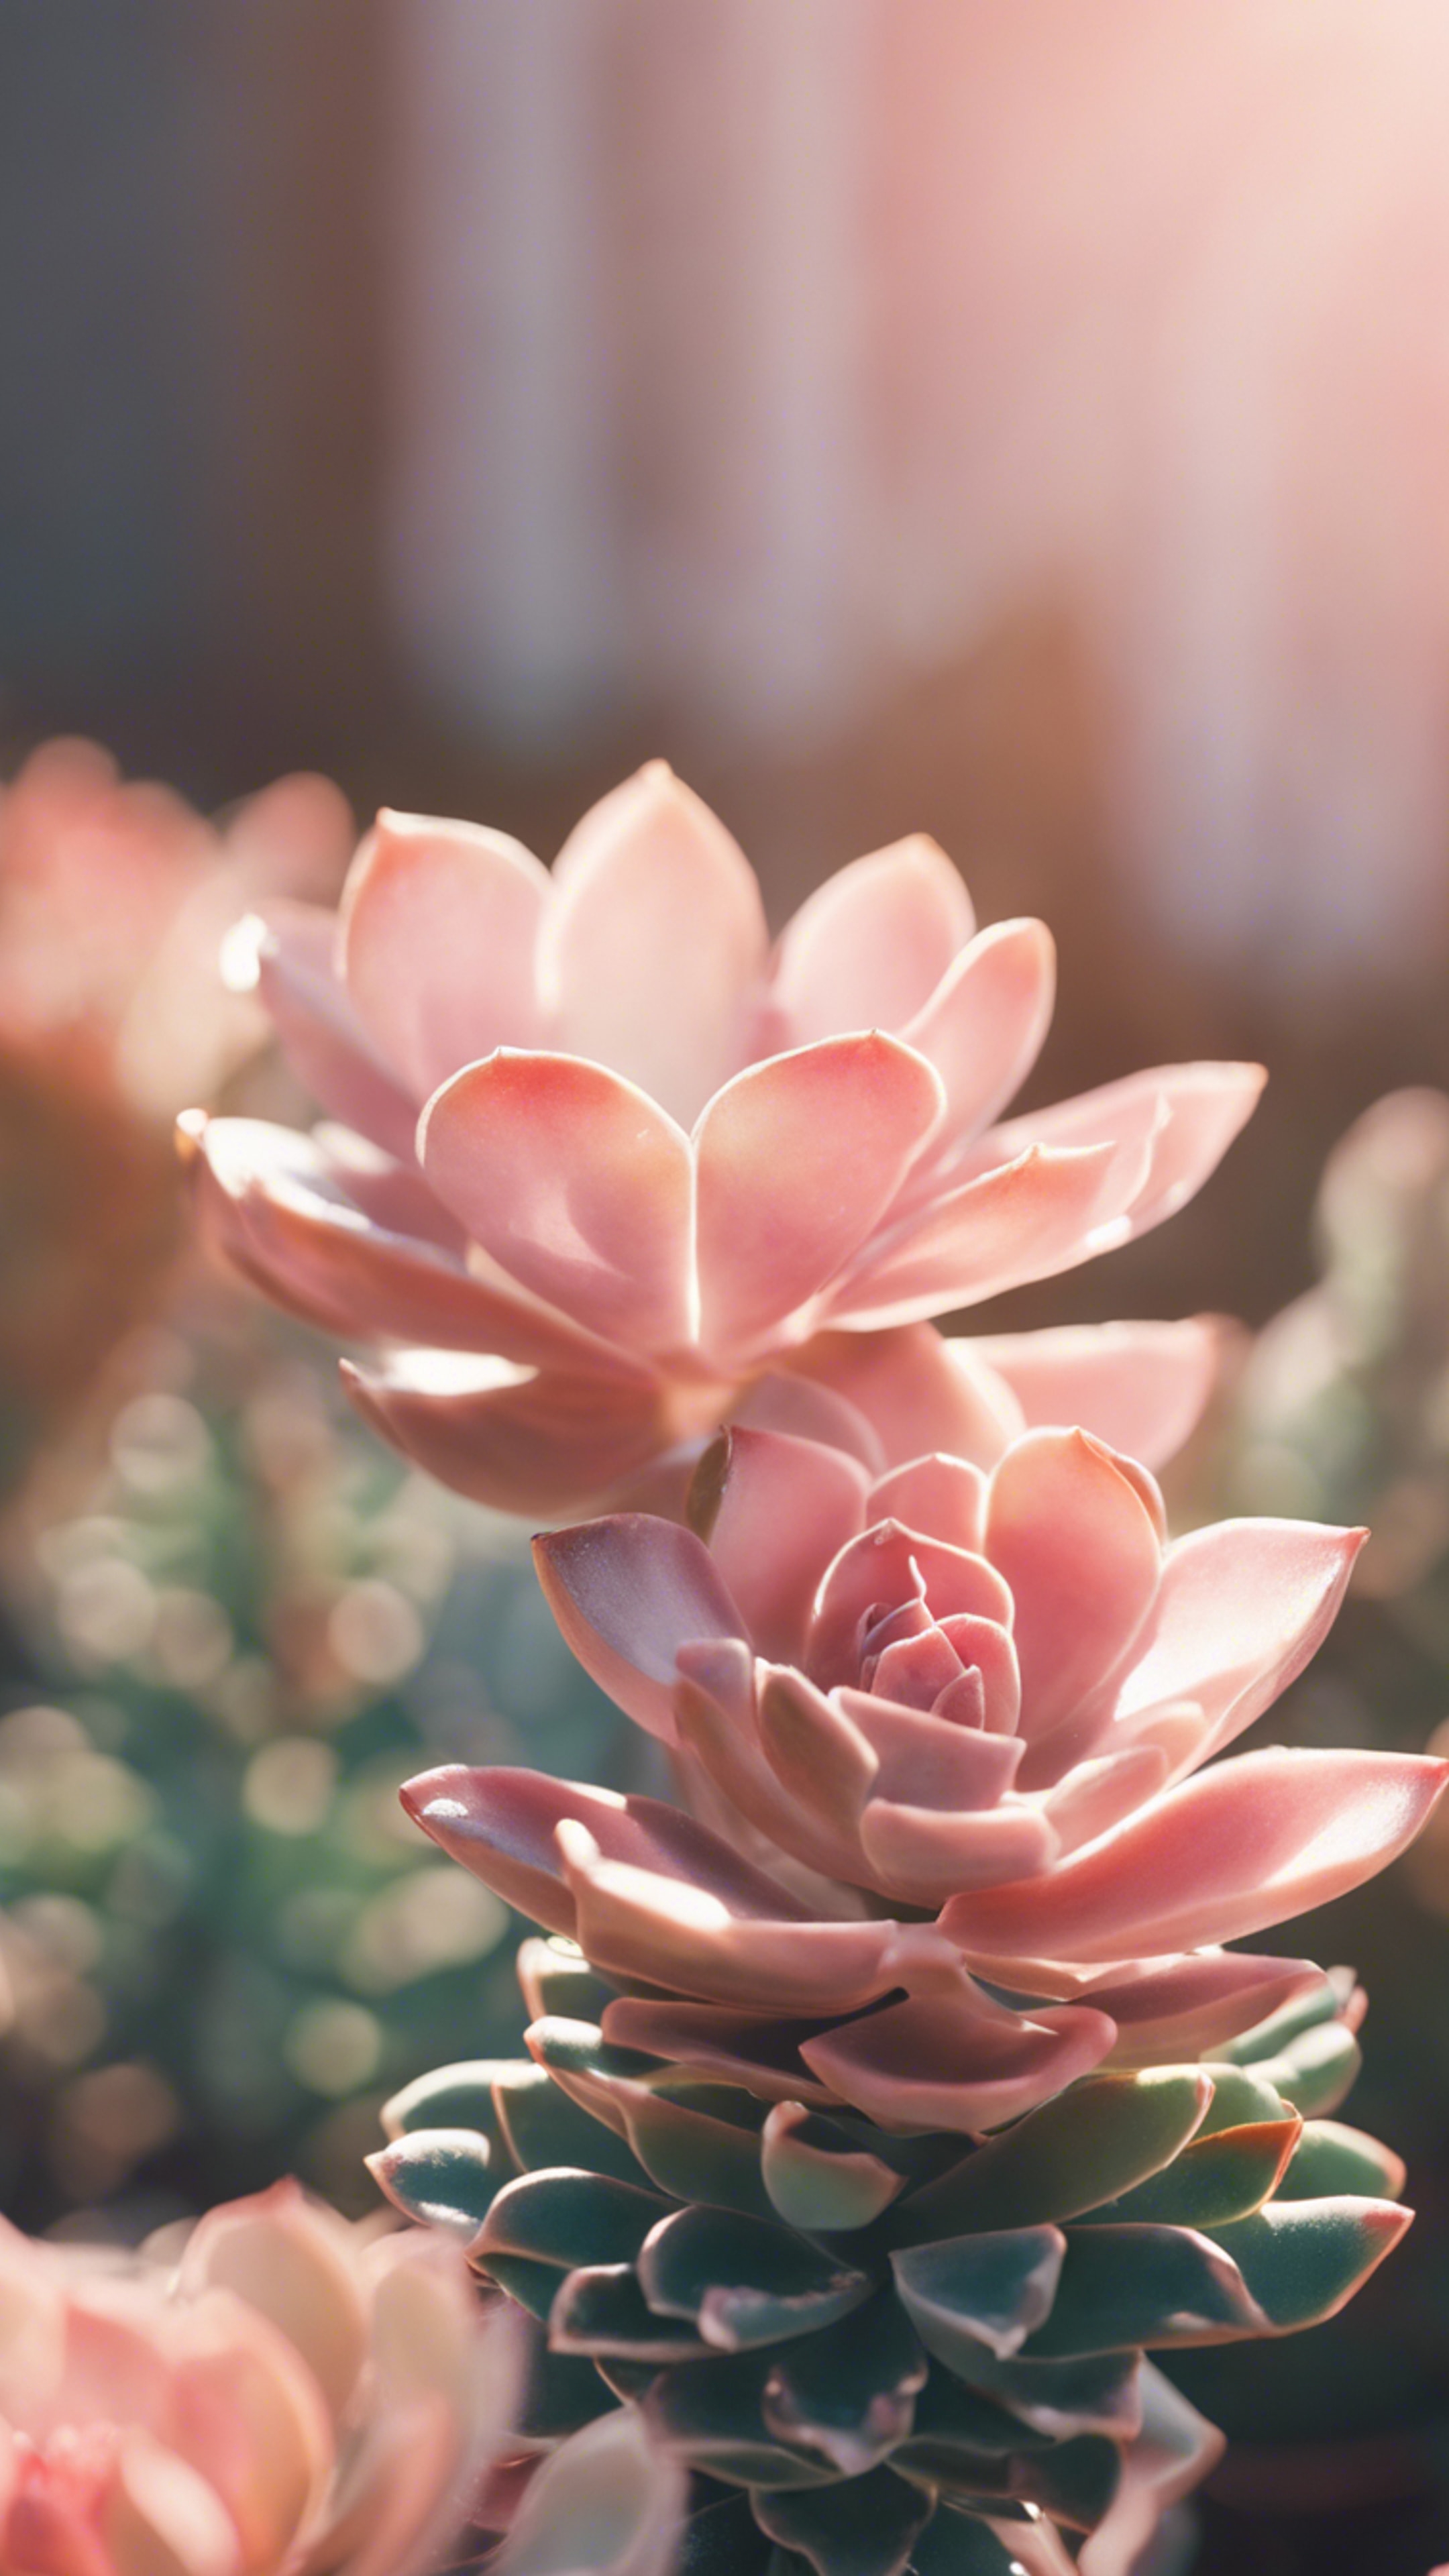 A close-up view of a preppy pastel pink succulent plant bathed in gentle morning sunshine. Tapeta[96679d4148894c129b05]